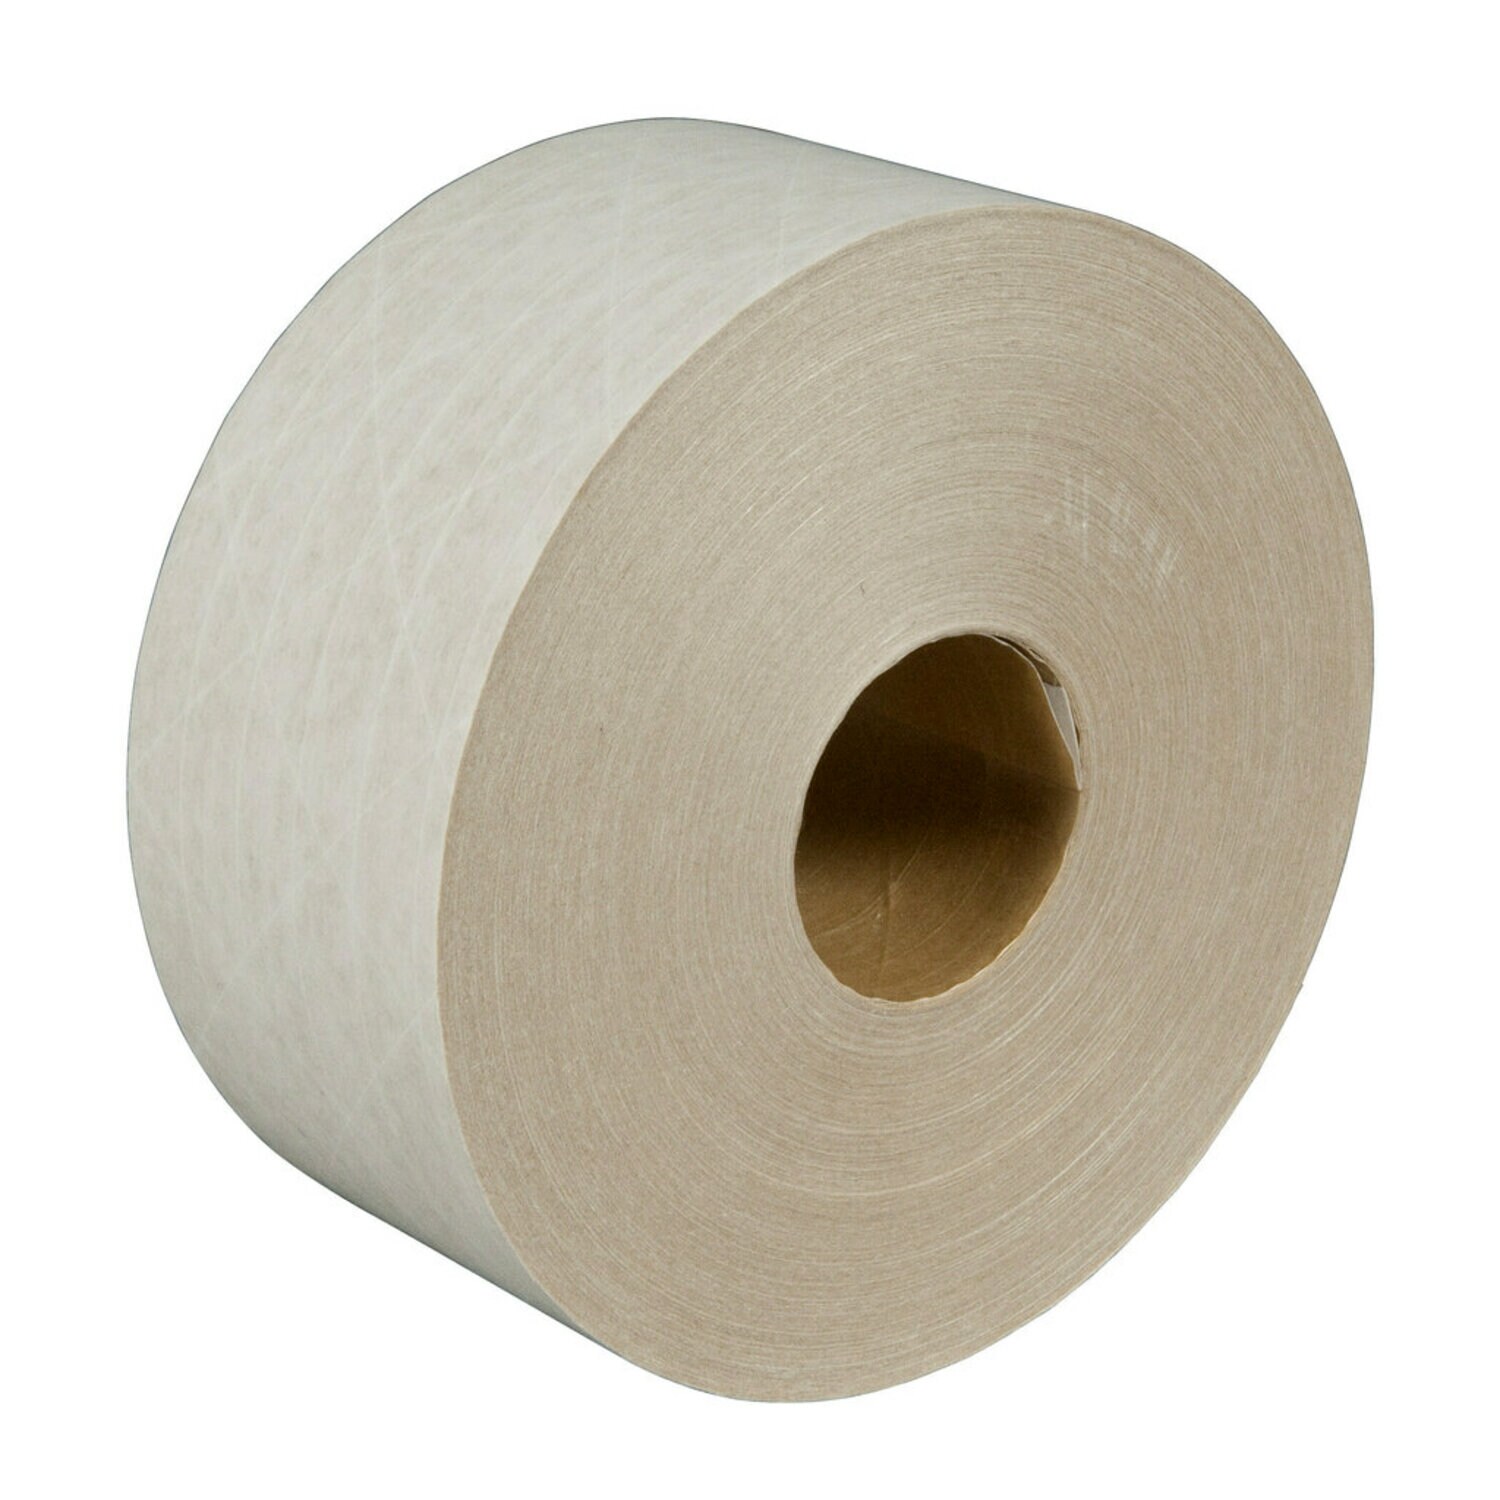 7010302392 - 3M Water Activated Paper Tape 6146, White, Medium Duty Reinforced, 72
mm x 450 ft, 10/Case